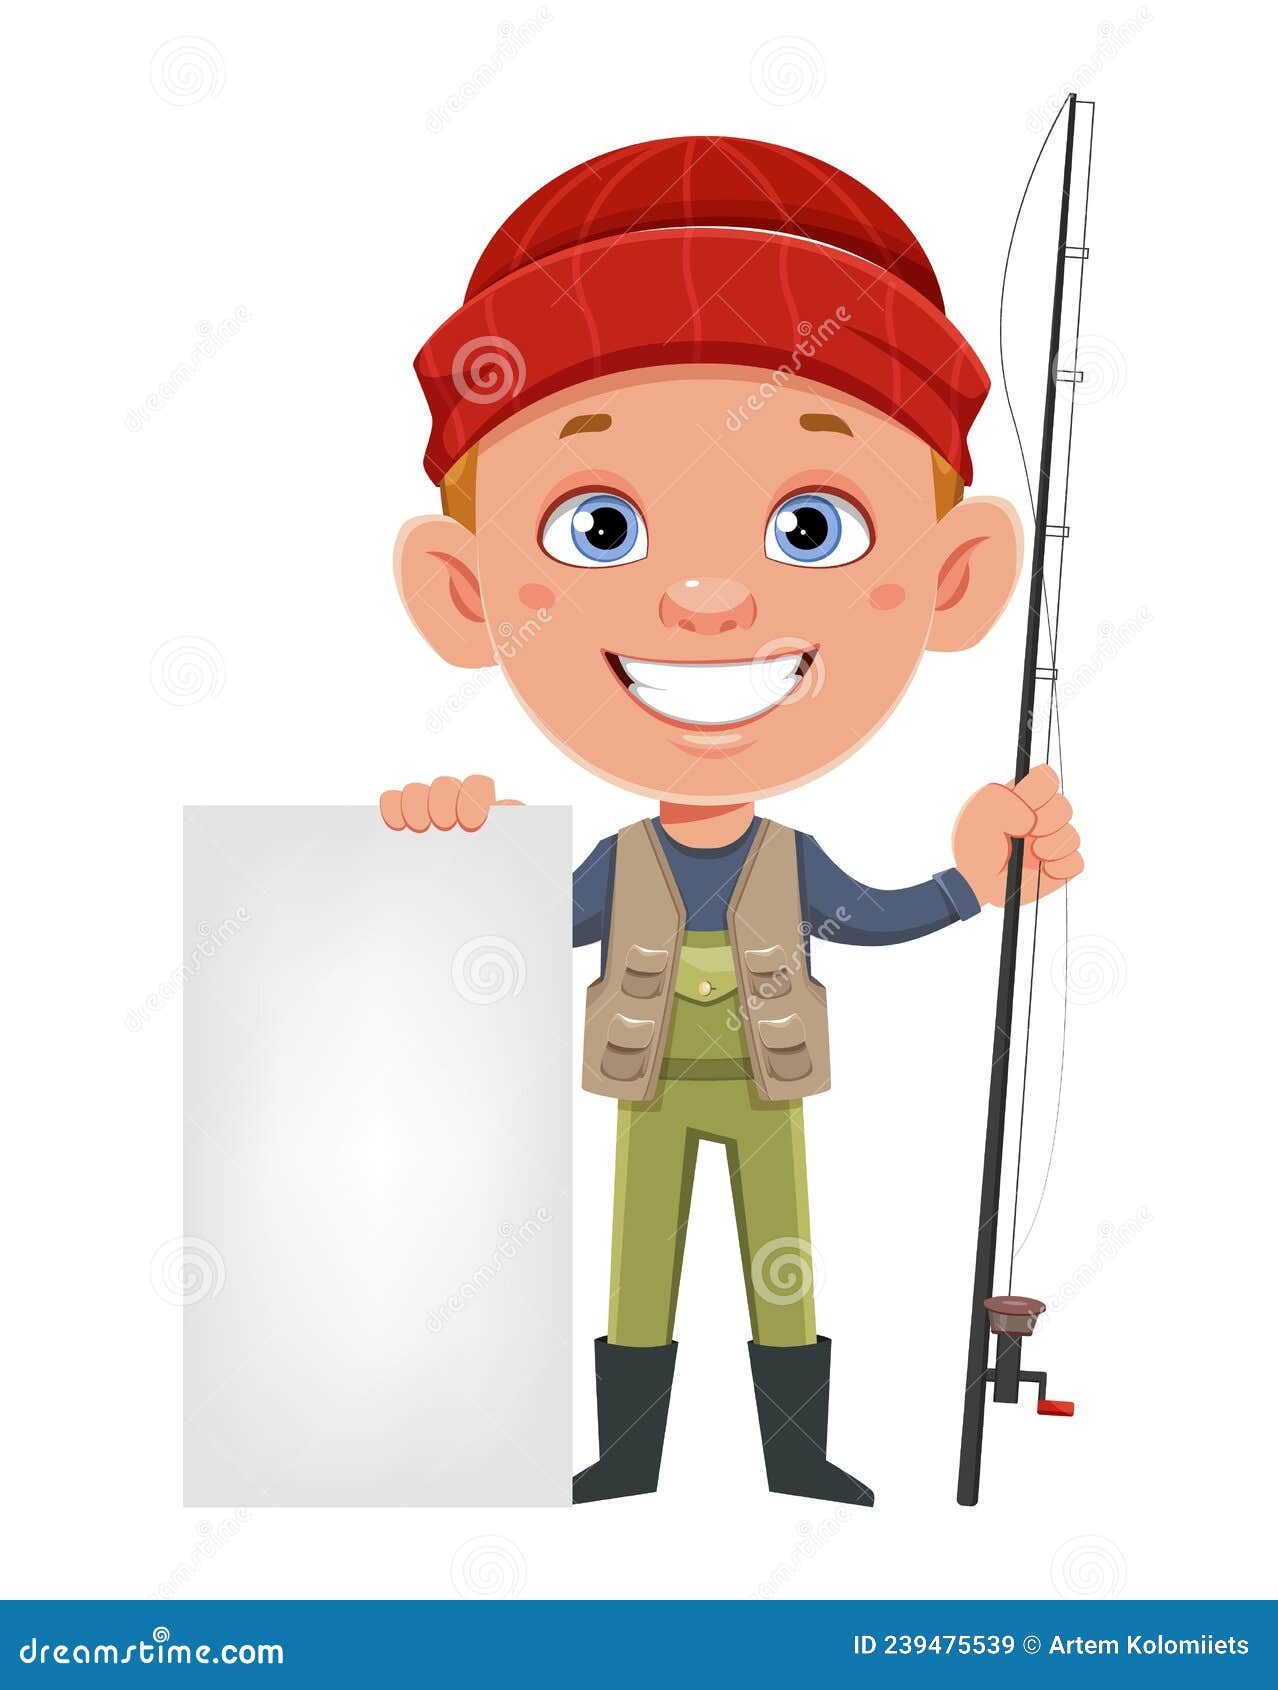 https://thumbs.dreamstime.com/z/fisherman-holding-fishing-rod-blank-placard-cheerful-fisher-cartoon-character-stock-vector-illustration-white-background-239475539.jpg